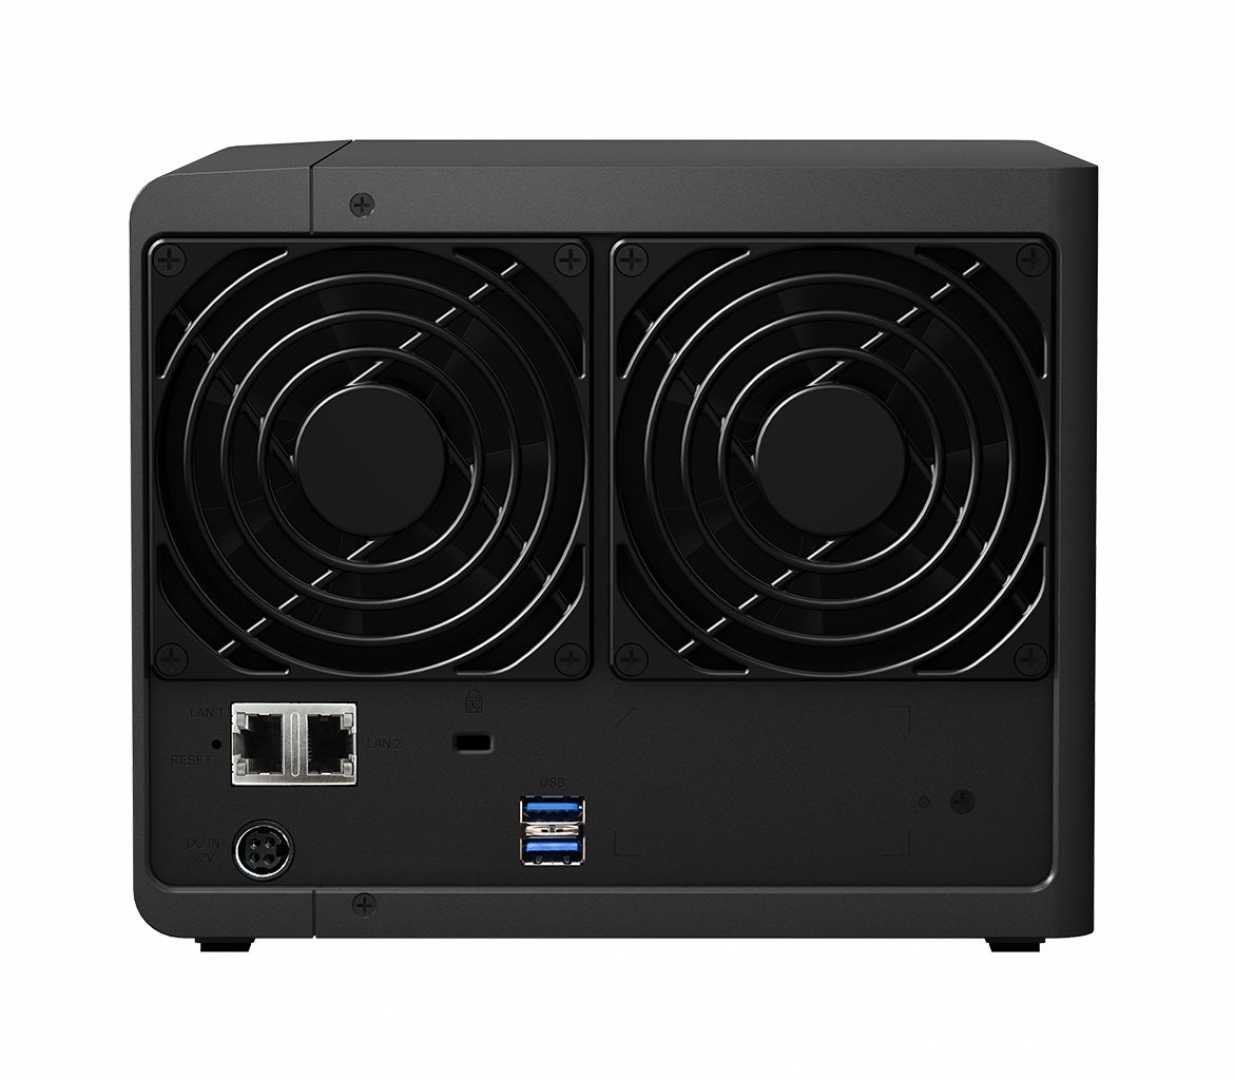 SYNOLOGY NAS DS418